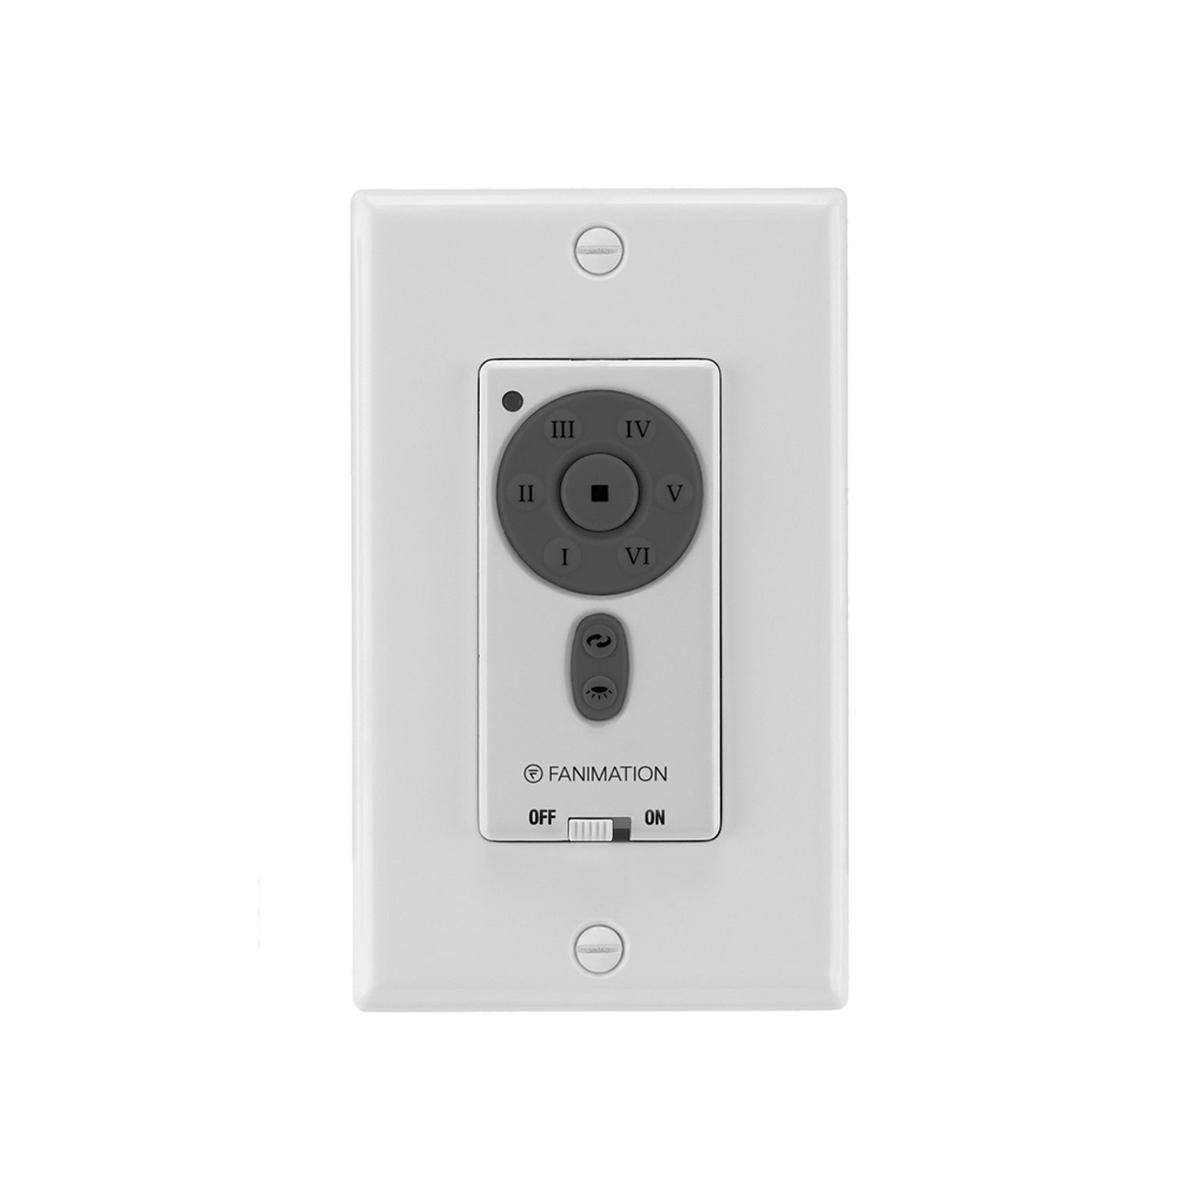 6-Speed DC Ceiling Fan And Light Wall Control, Reversing Switch, White And Dark Gray Finish